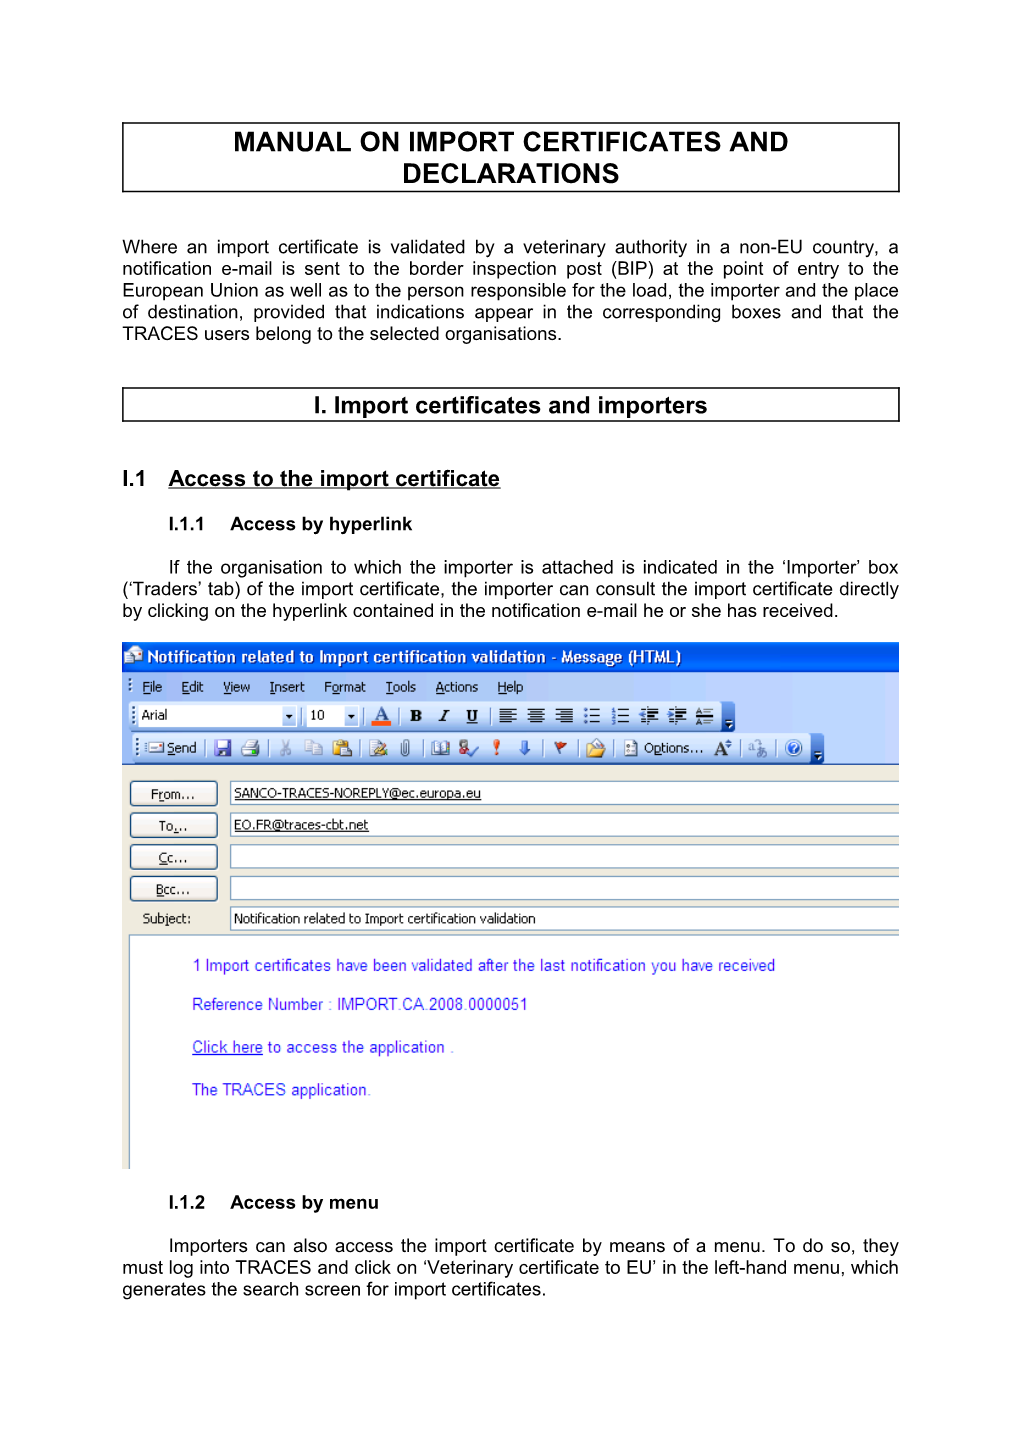 Manual on Import Certificates and Declarations